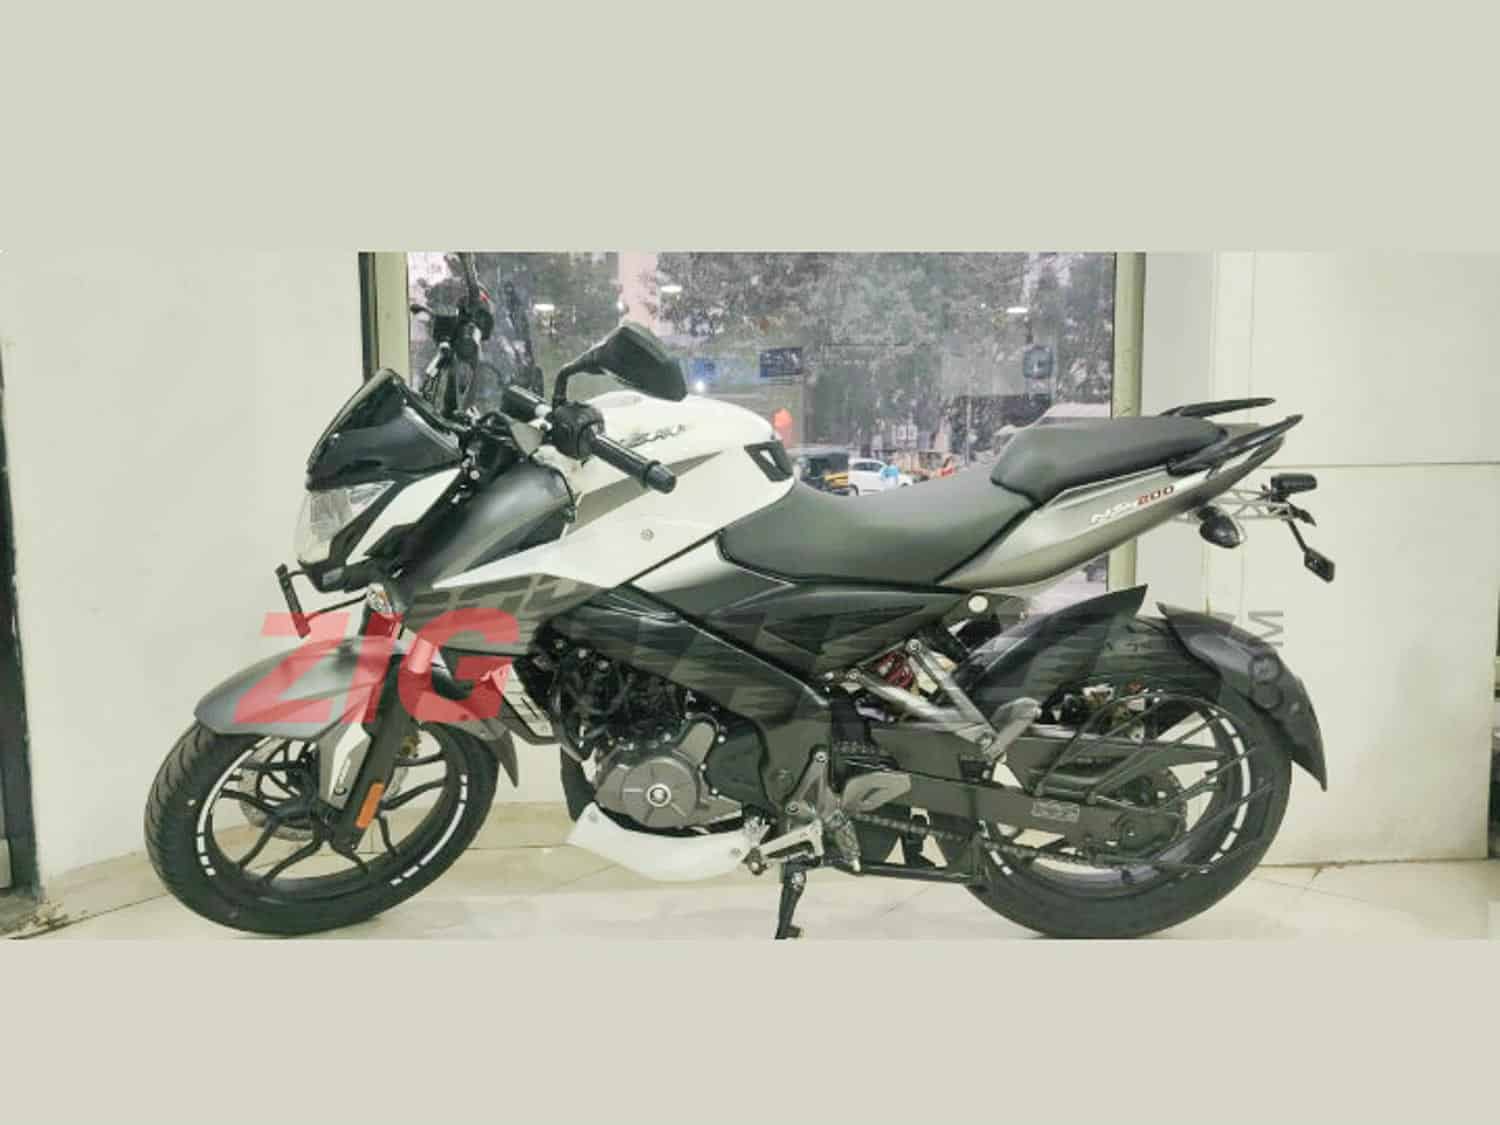 Bs6 Bajaj Pulsar 200 Ns Fi Launch Price Rs 11k More Expensive Than Bs4